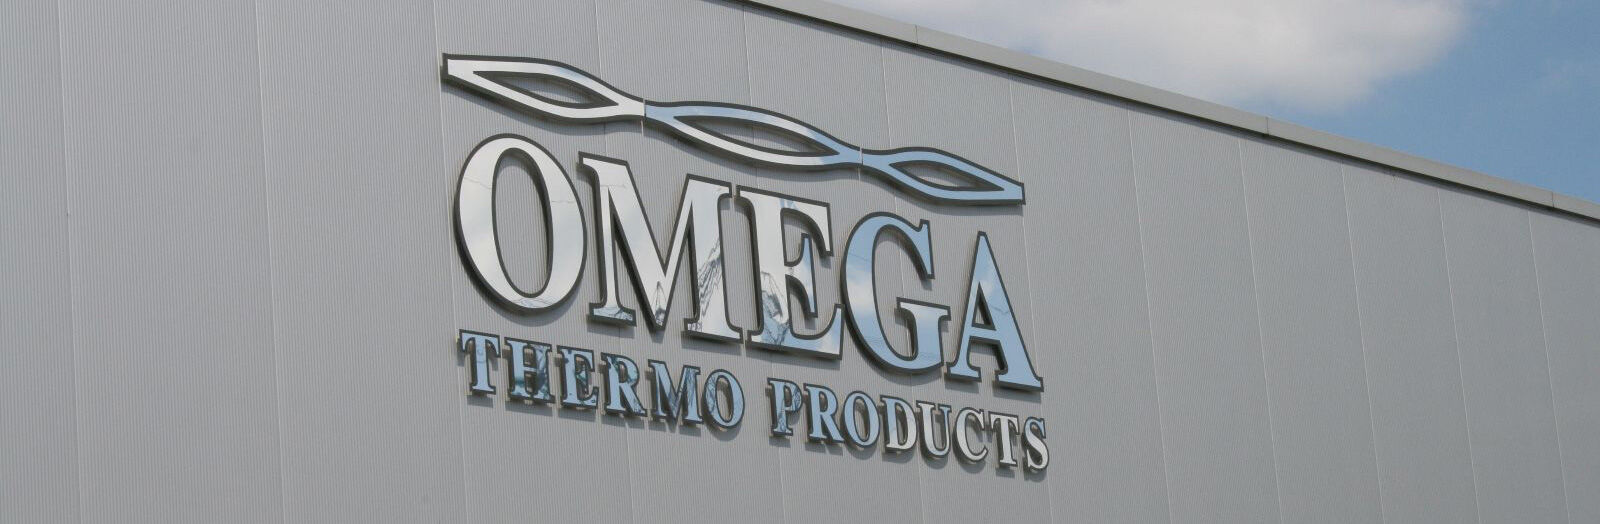 Omega Thermo Products